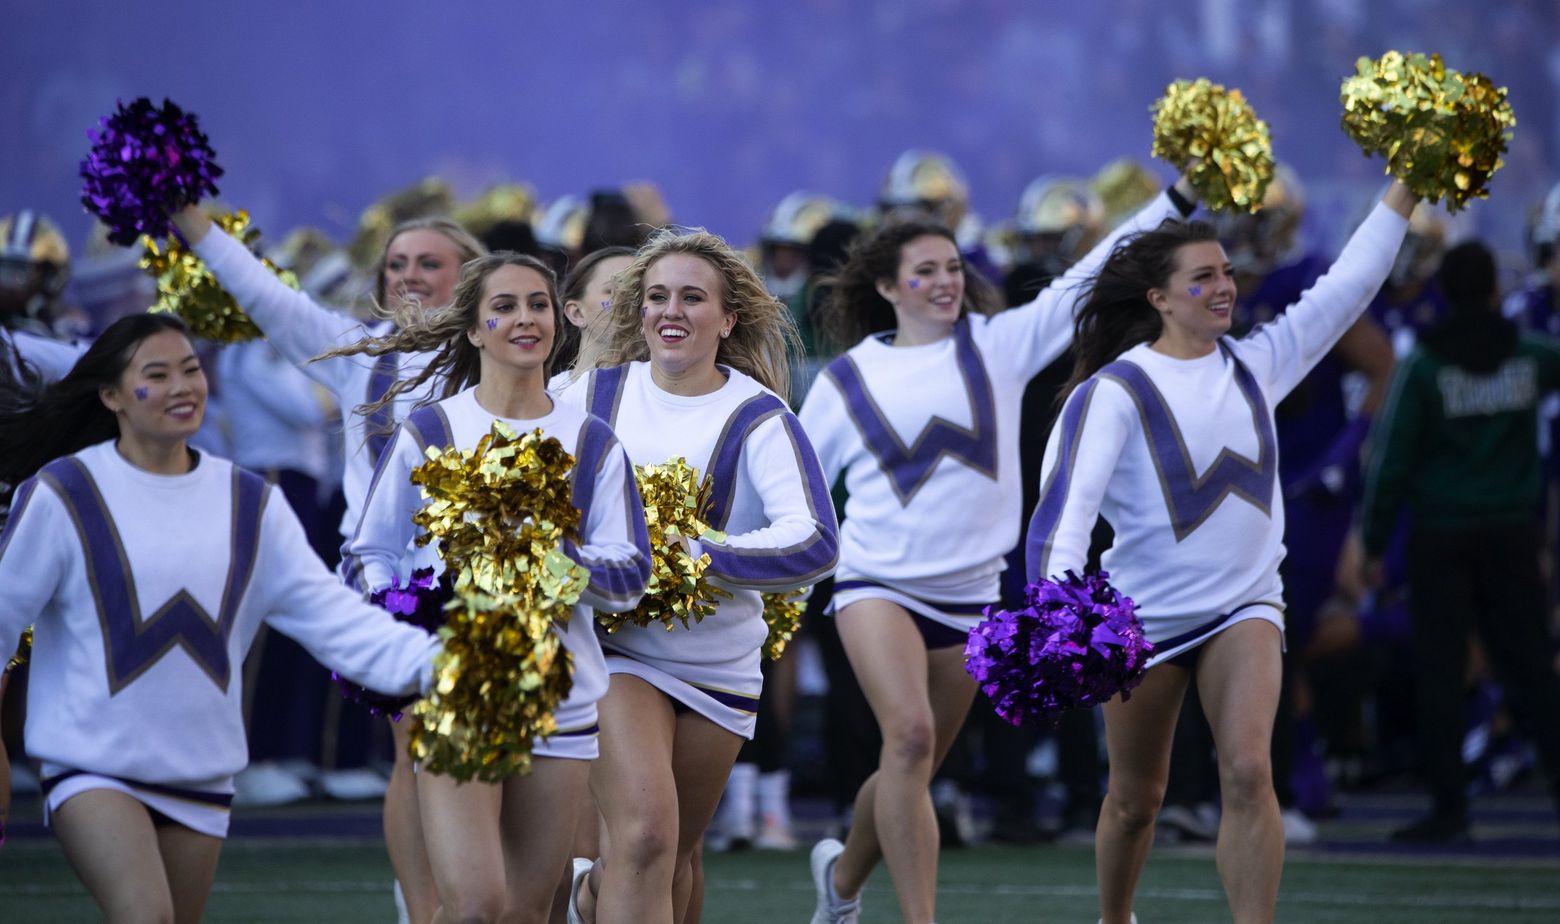 UW removes dance coach, asks Black members to rejoin team and pledges to  include diversity in tryout process | The Seattle Times